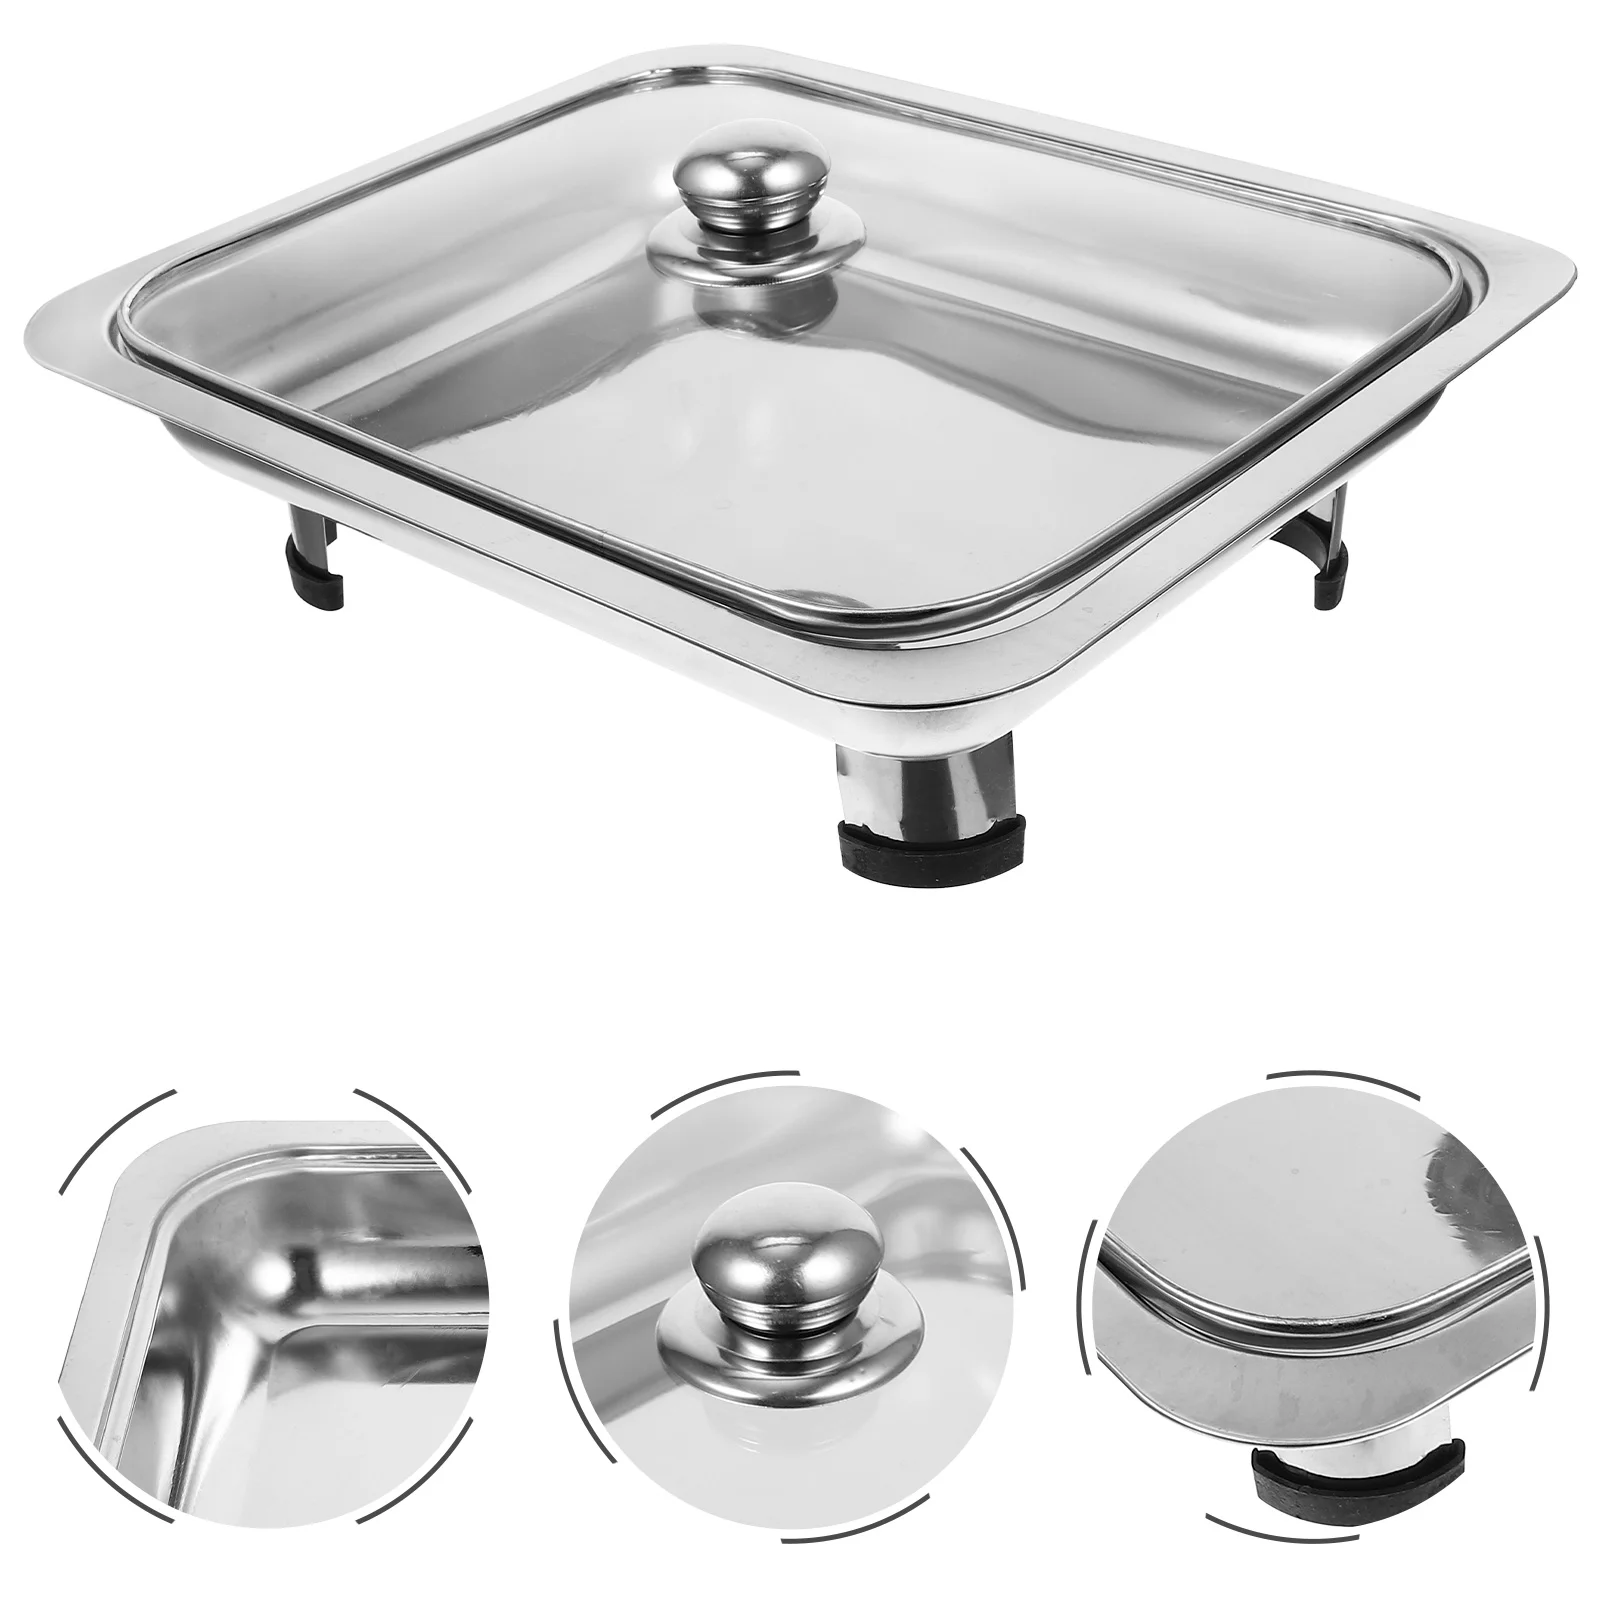 

Buffet Chafing Food Set Dish Warmer Pan Tray Chafer Steel Stainless Server Serving Warmers Pans Dishes Trays Catering Servers